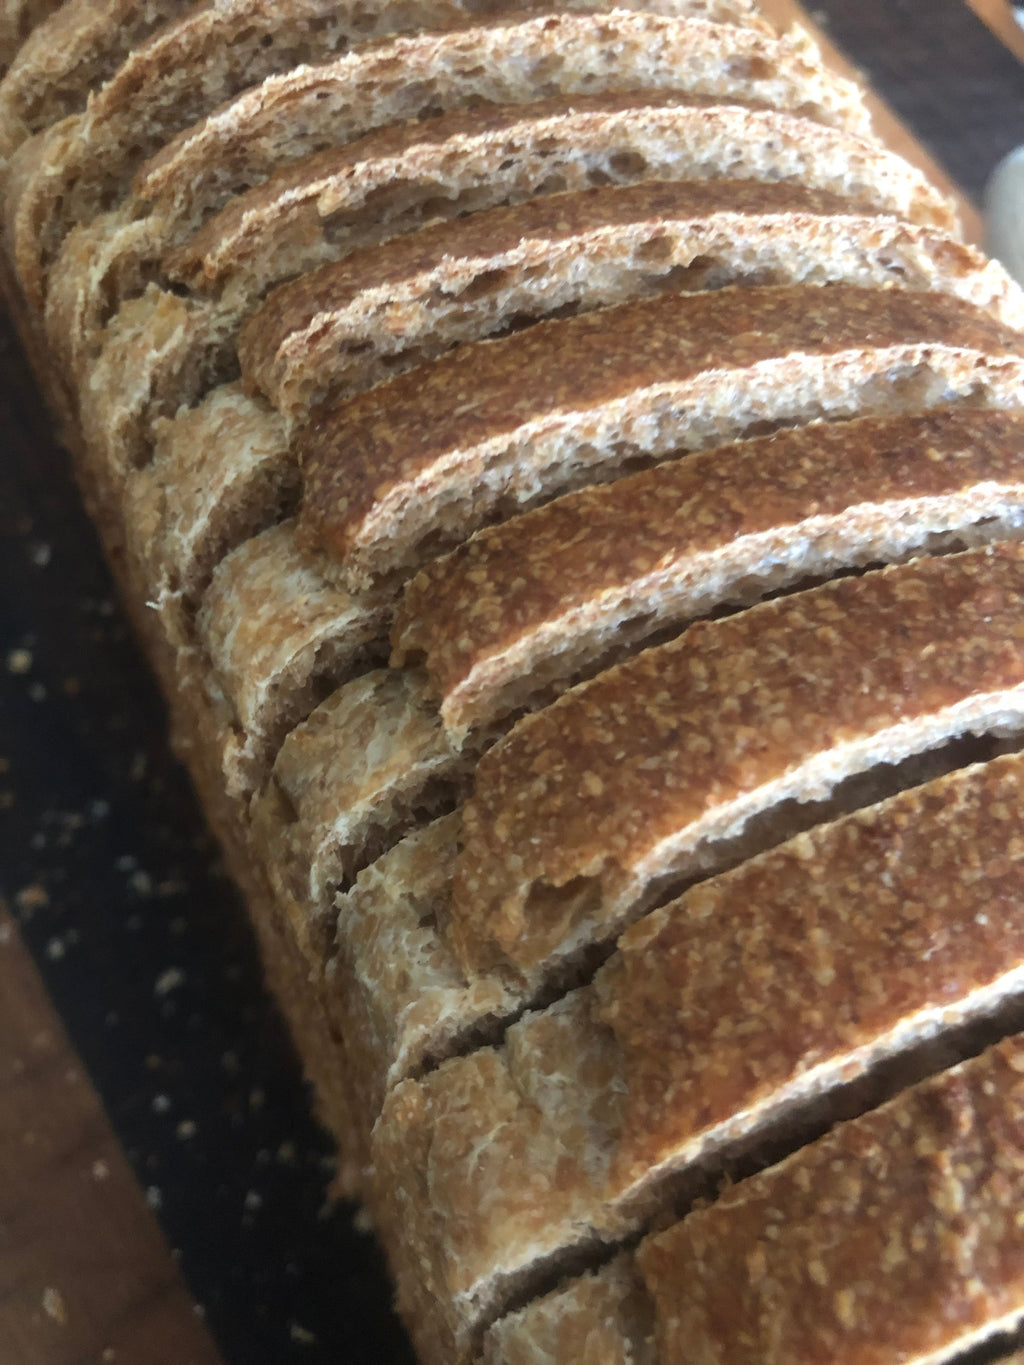 🌾WED MAR 6th Spelt Sandwich Bread 100% freshly milled in-house - Porch Pick up 4pm-9pm OR Purplebrown Farm Store 4:30-6pm